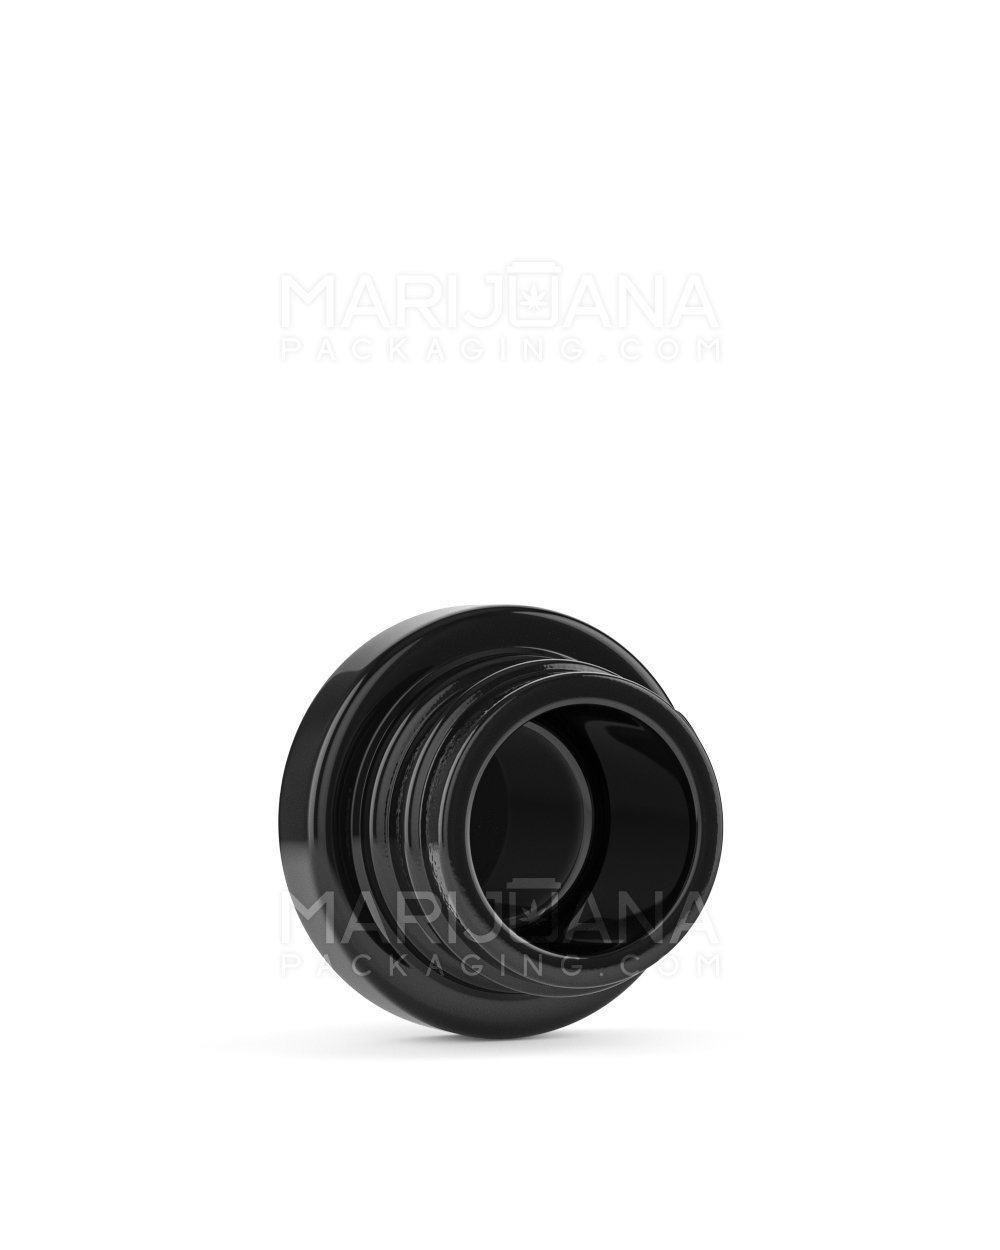 Glossy Black Glass Concentrate Containers | 28mm - 5mL - 504 Count - 3